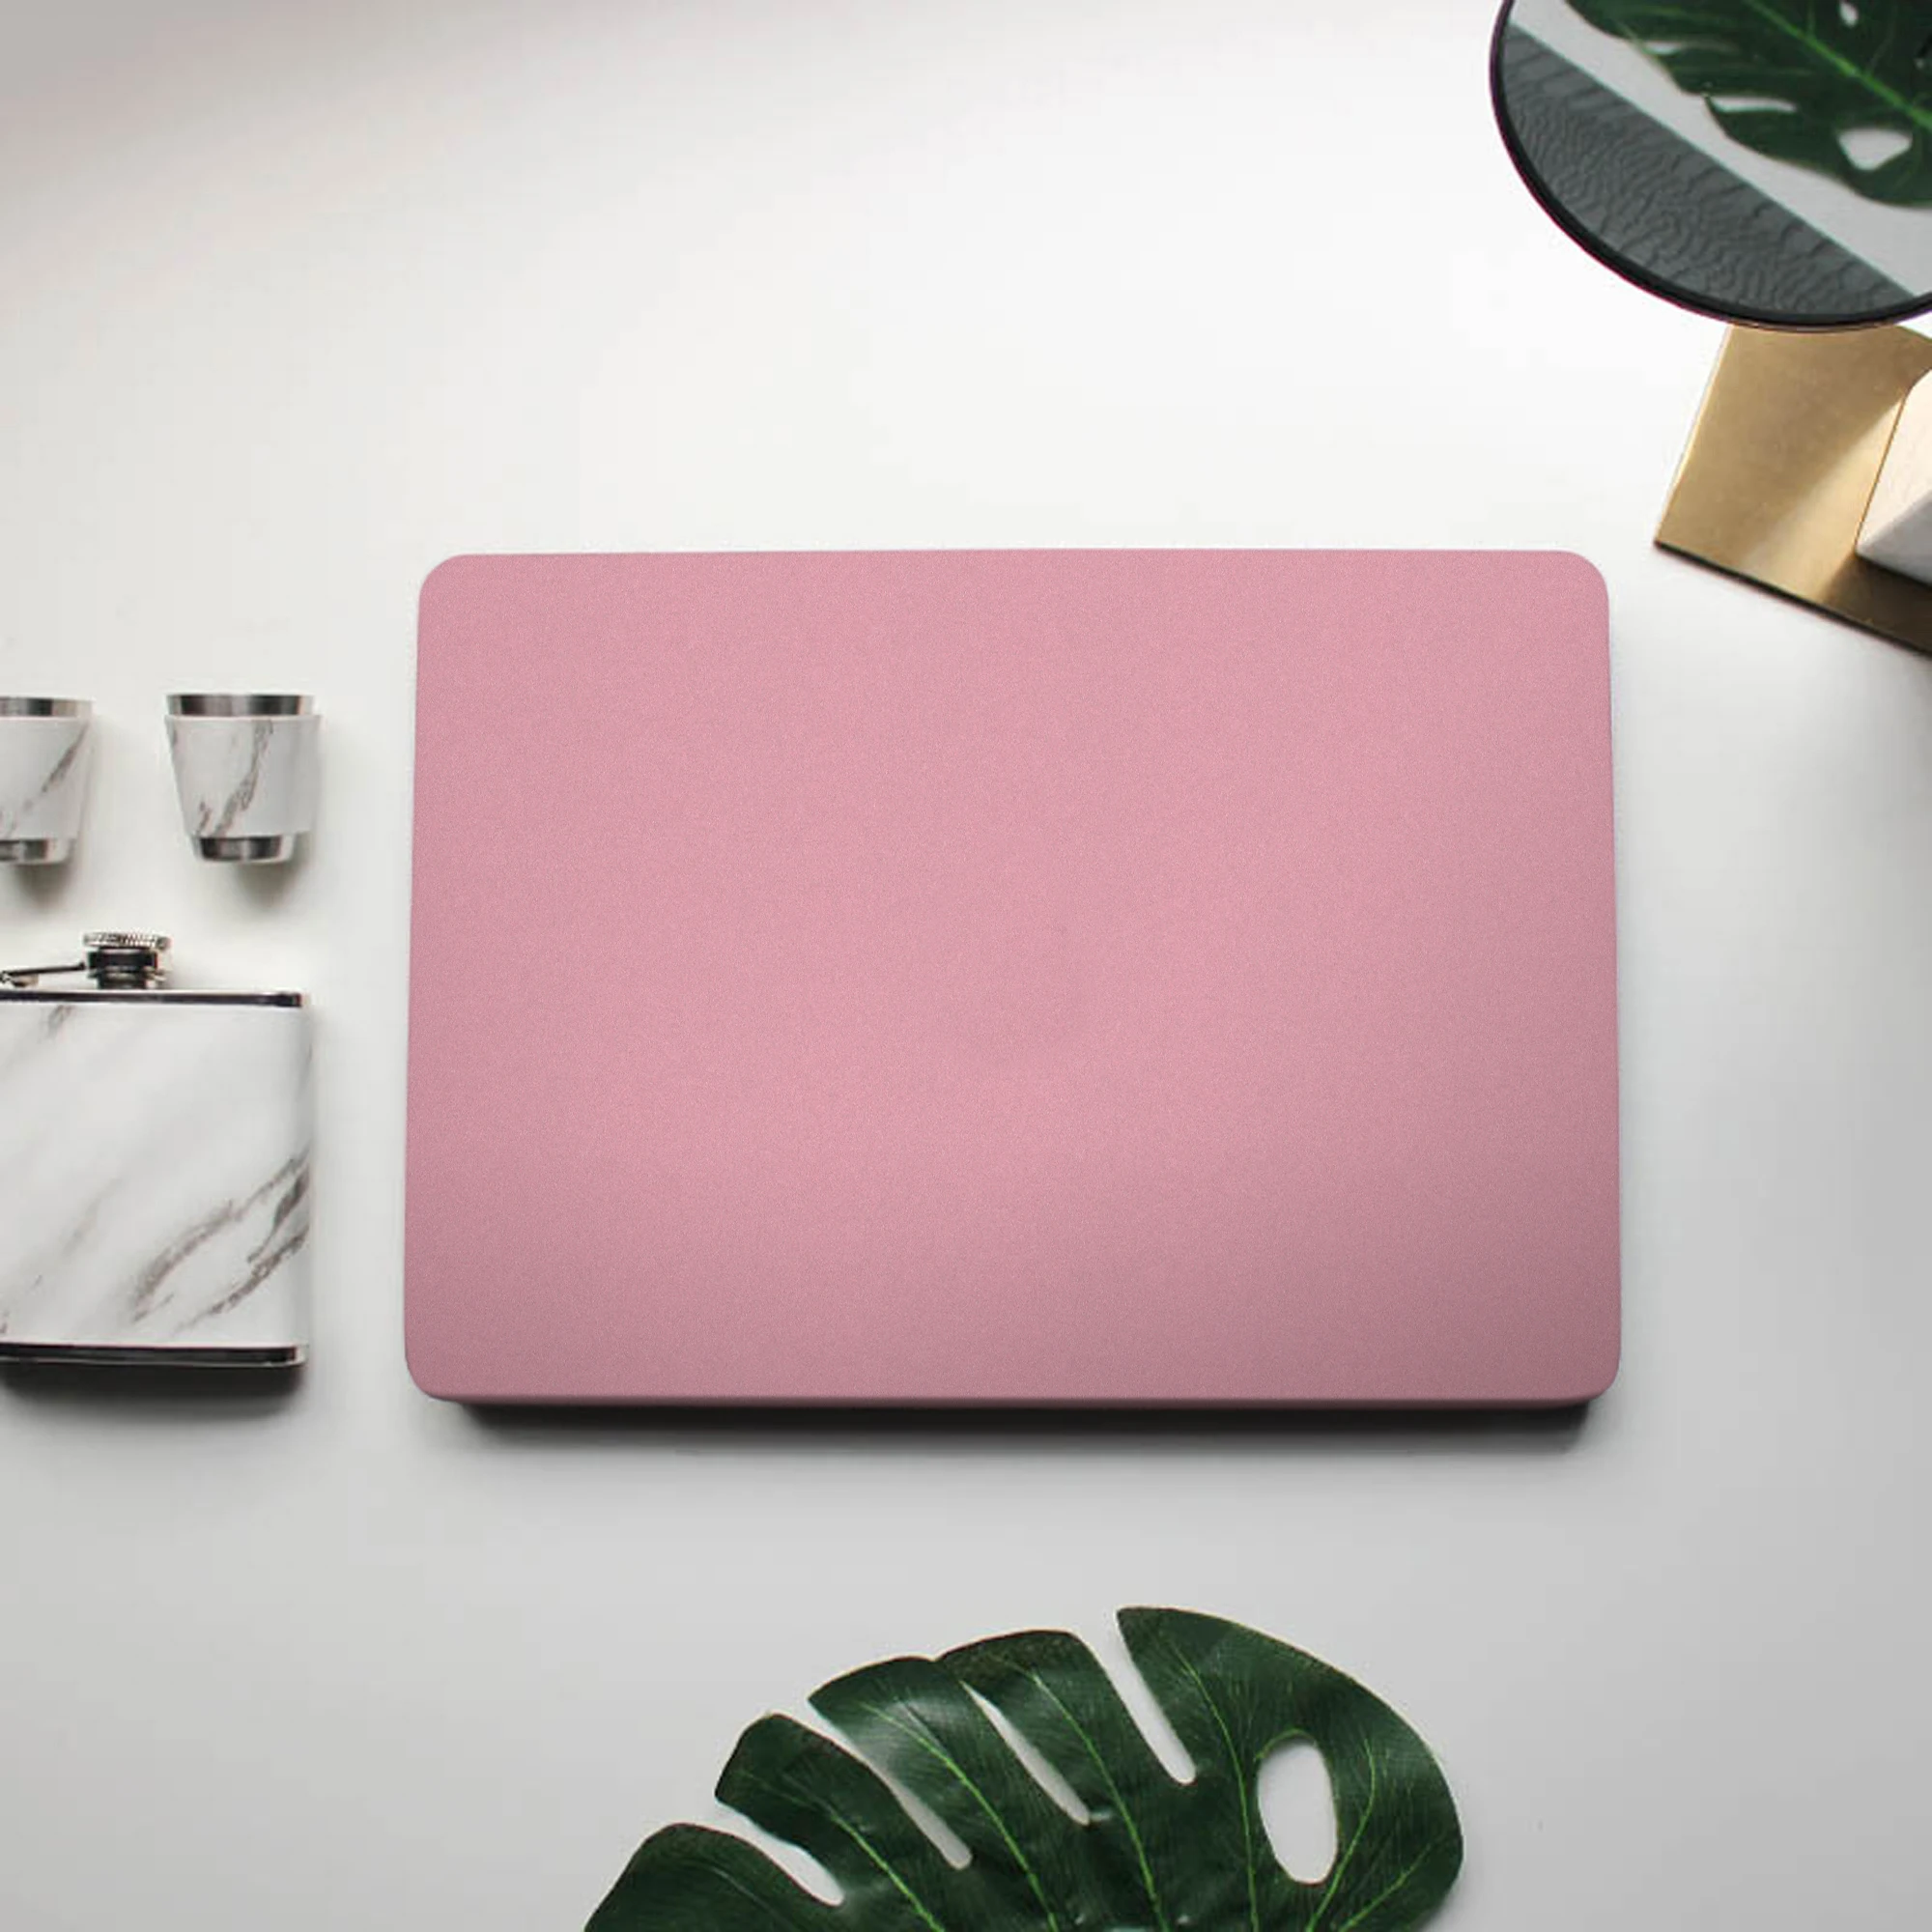 

Frosted Leather Laptop Case Macbook Cover Pink Protect Cover for MacBook Air 13 Macbook Pro 13 14 16 15 Air 13 12 inch A2681